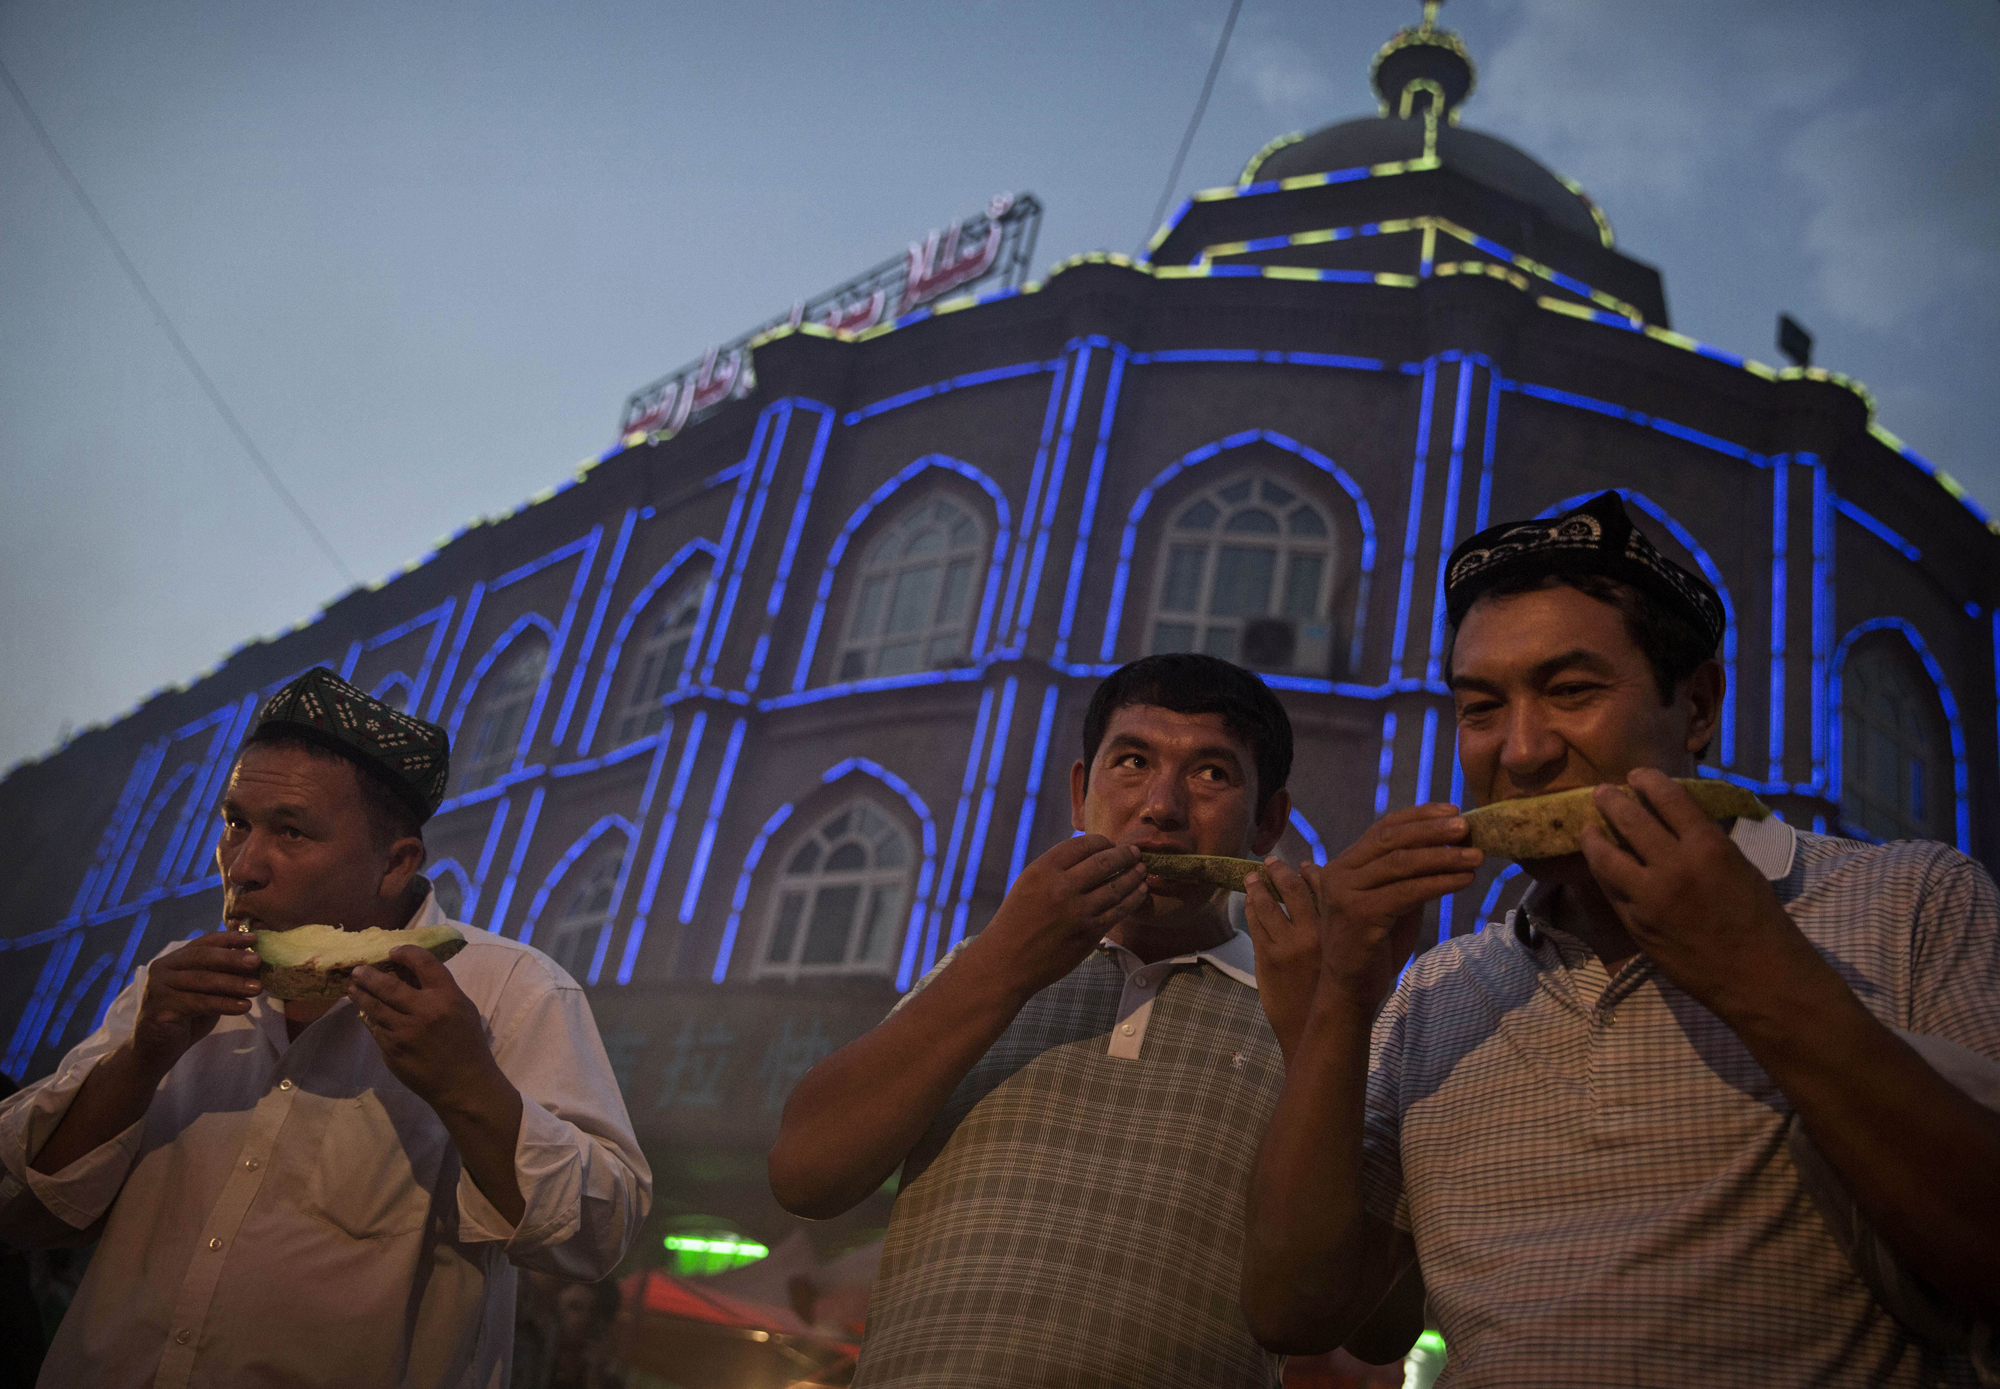 Uyghur men eat melon as they break their Ramadan fast before the Eid holiday at a night market on July 28, 2014 in old Kashgar.